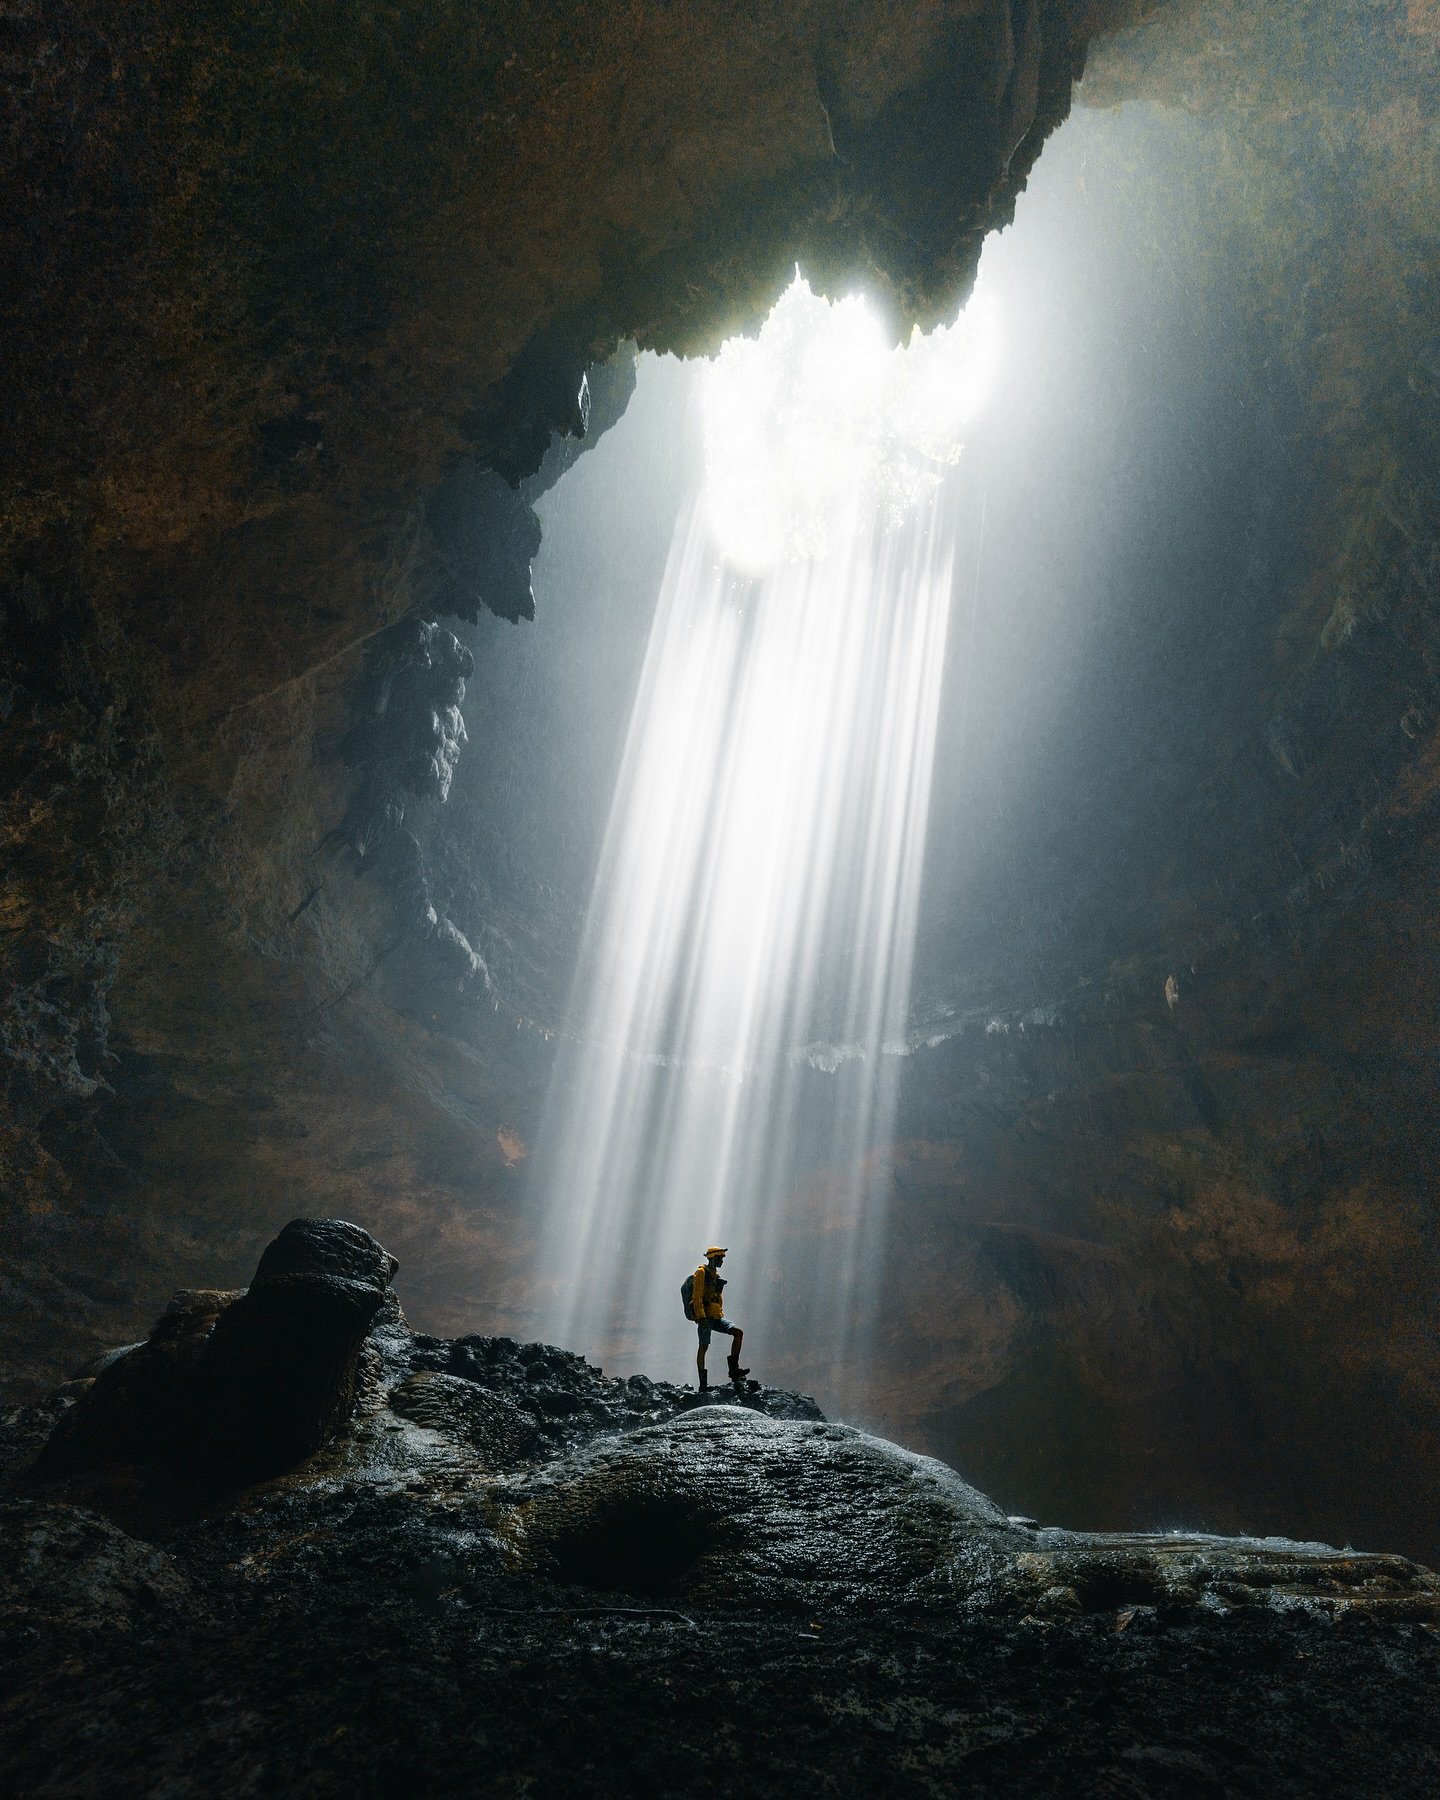 An adventure unlike anything else I&rsquo;ve ever experienced before. We descended into a cave system in Indonesia, hidden beneath a dense forest. We hiked through the tunnels in the dark until we reached a giant sinkhole, just in time to witness the